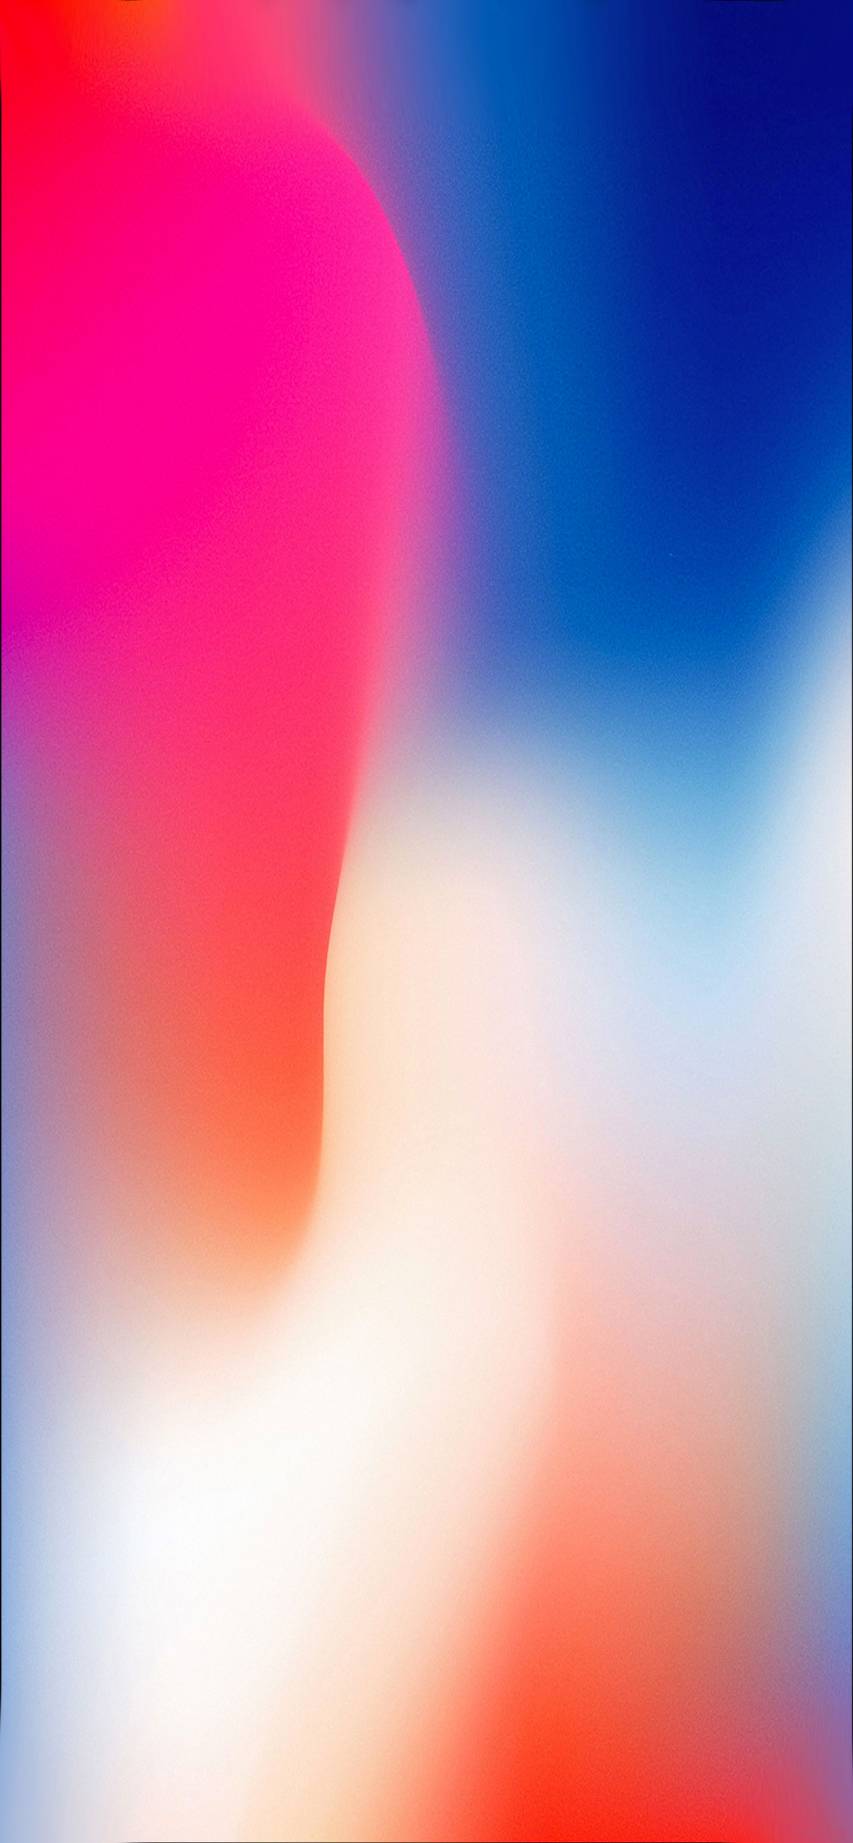 Blurred Art iPhone ios 10 Wallpapers Pic